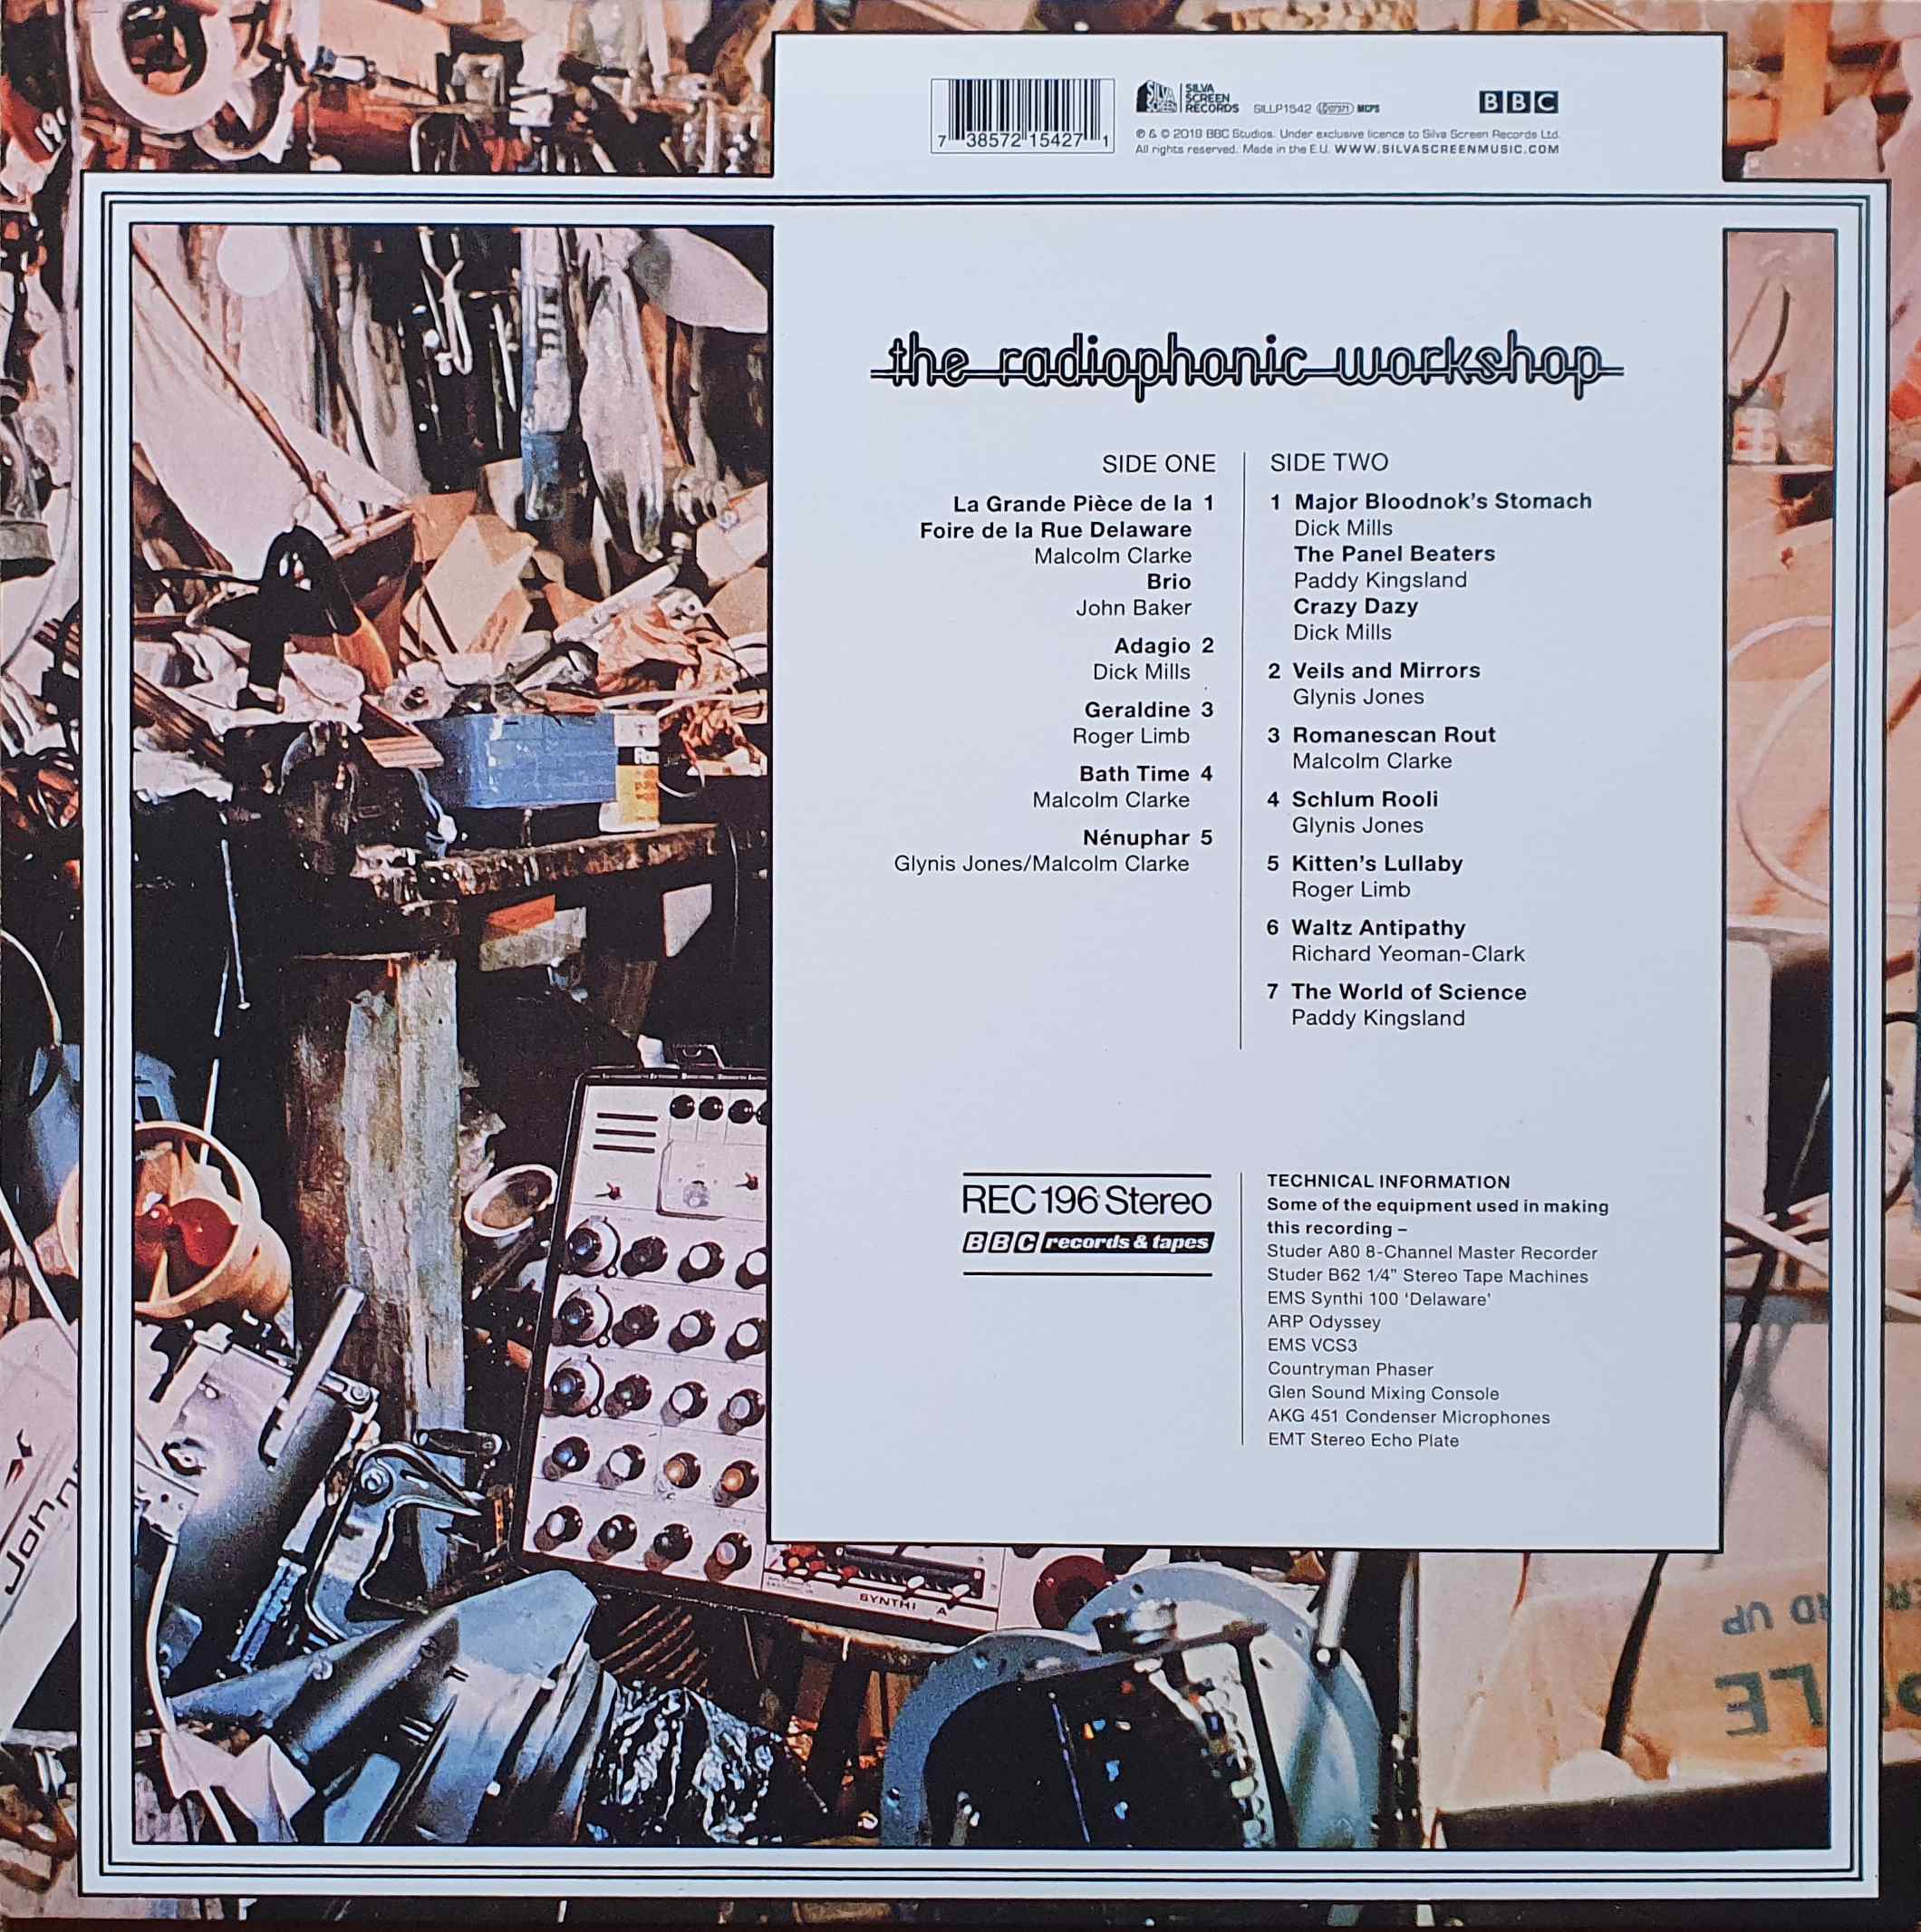 Picture of SILLP 1542 The Radiophonic Workshop by artist Various from the BBC records and Tapes library